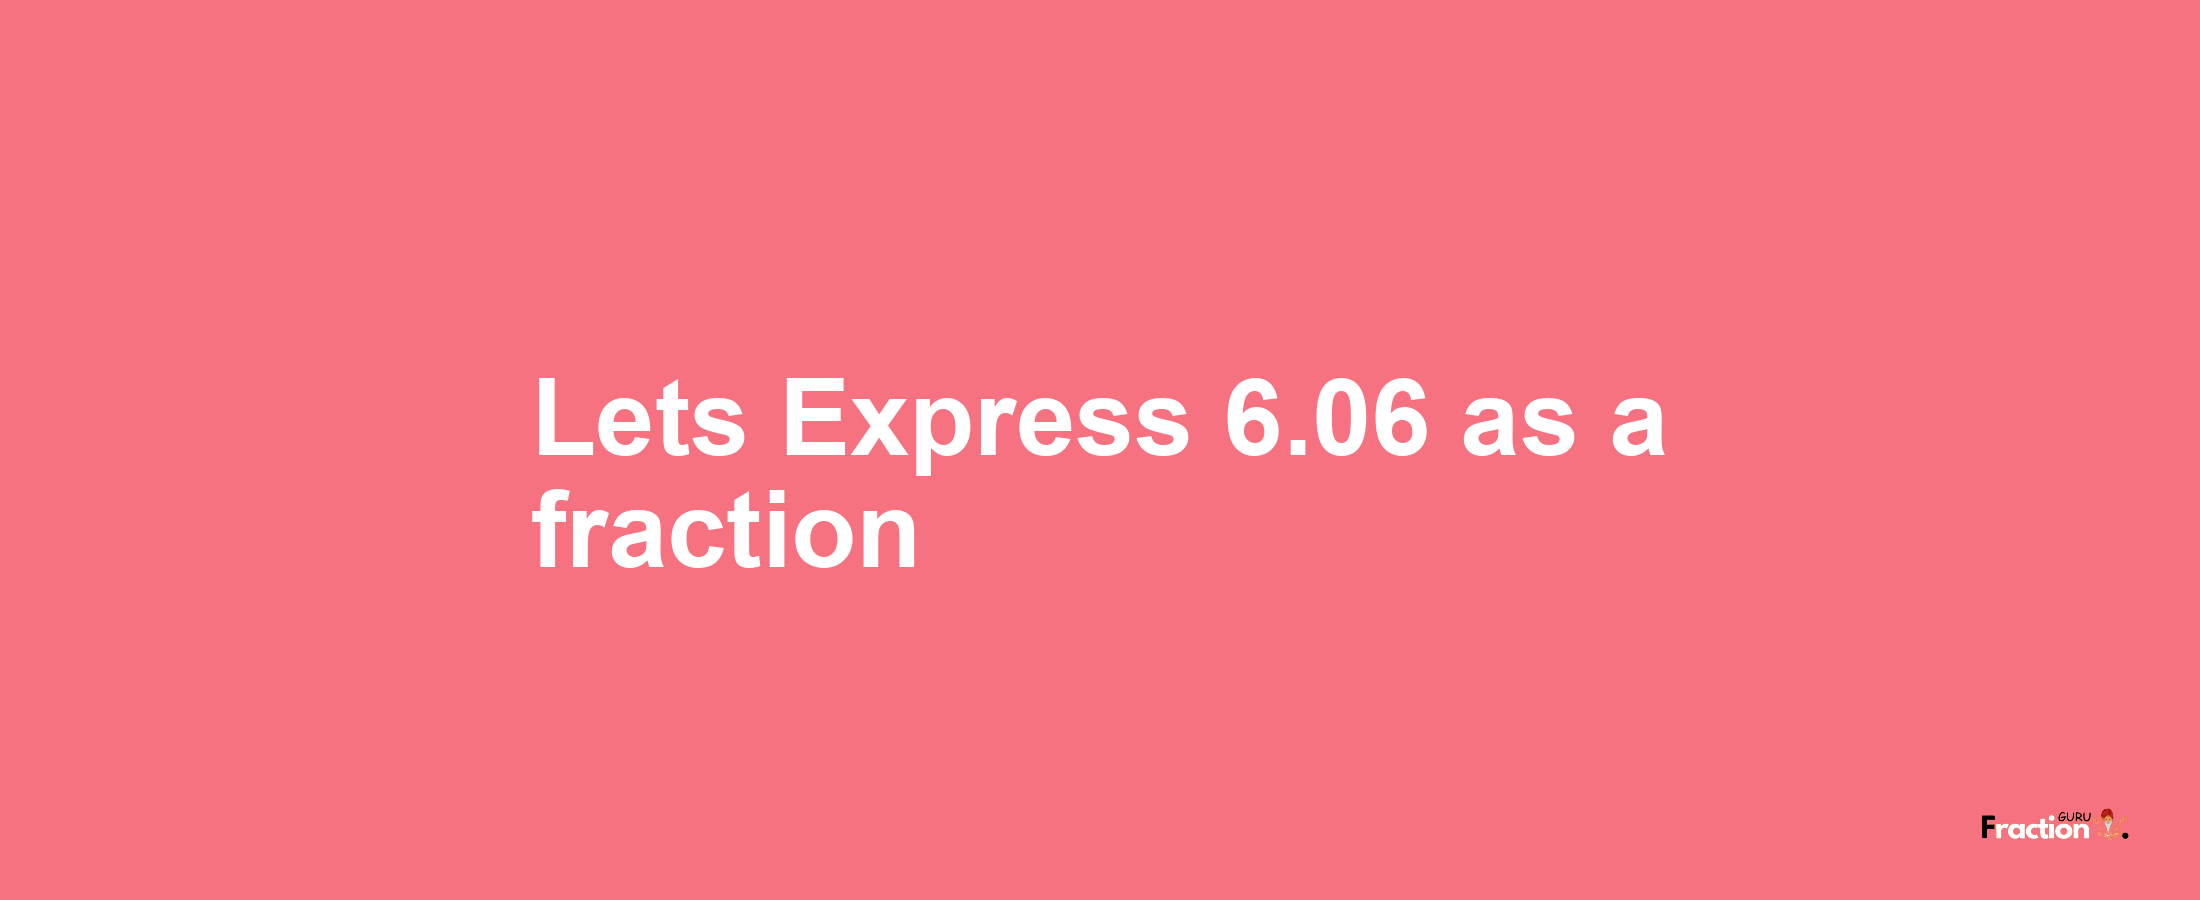 Lets Express 6.06 as afraction